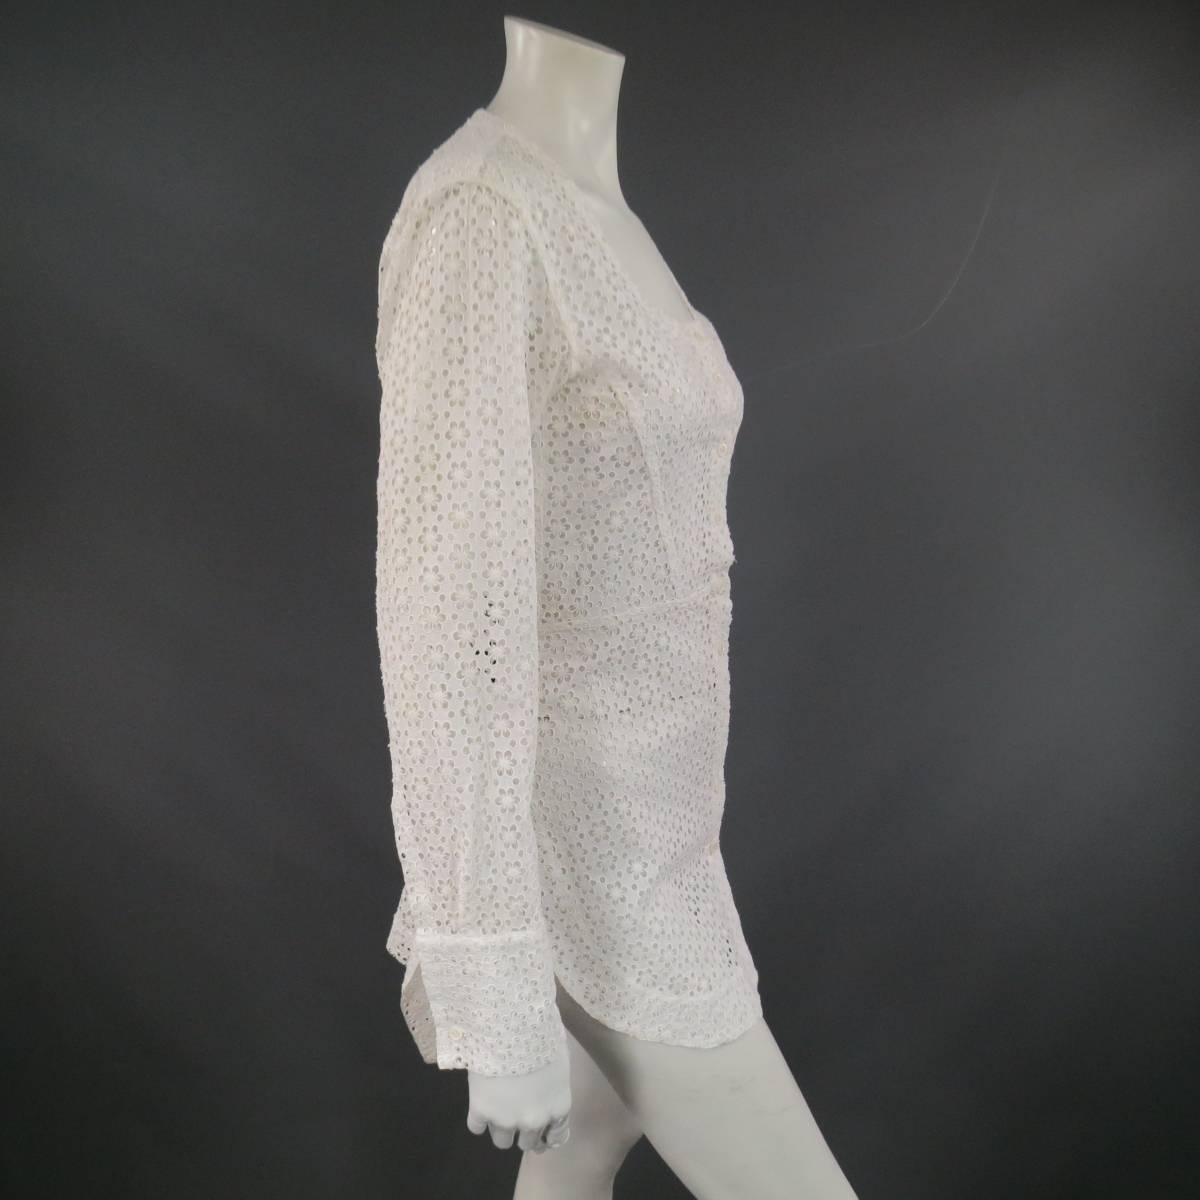 This gorgeous ALAIA blouse dress comes in white cotton lace with all over flower polka dot cutout print and features a scoop neck, long sleeves, curved hem and gather back slit skirt. Buttons on cuffs have been moved on one side. Made in Italy.
